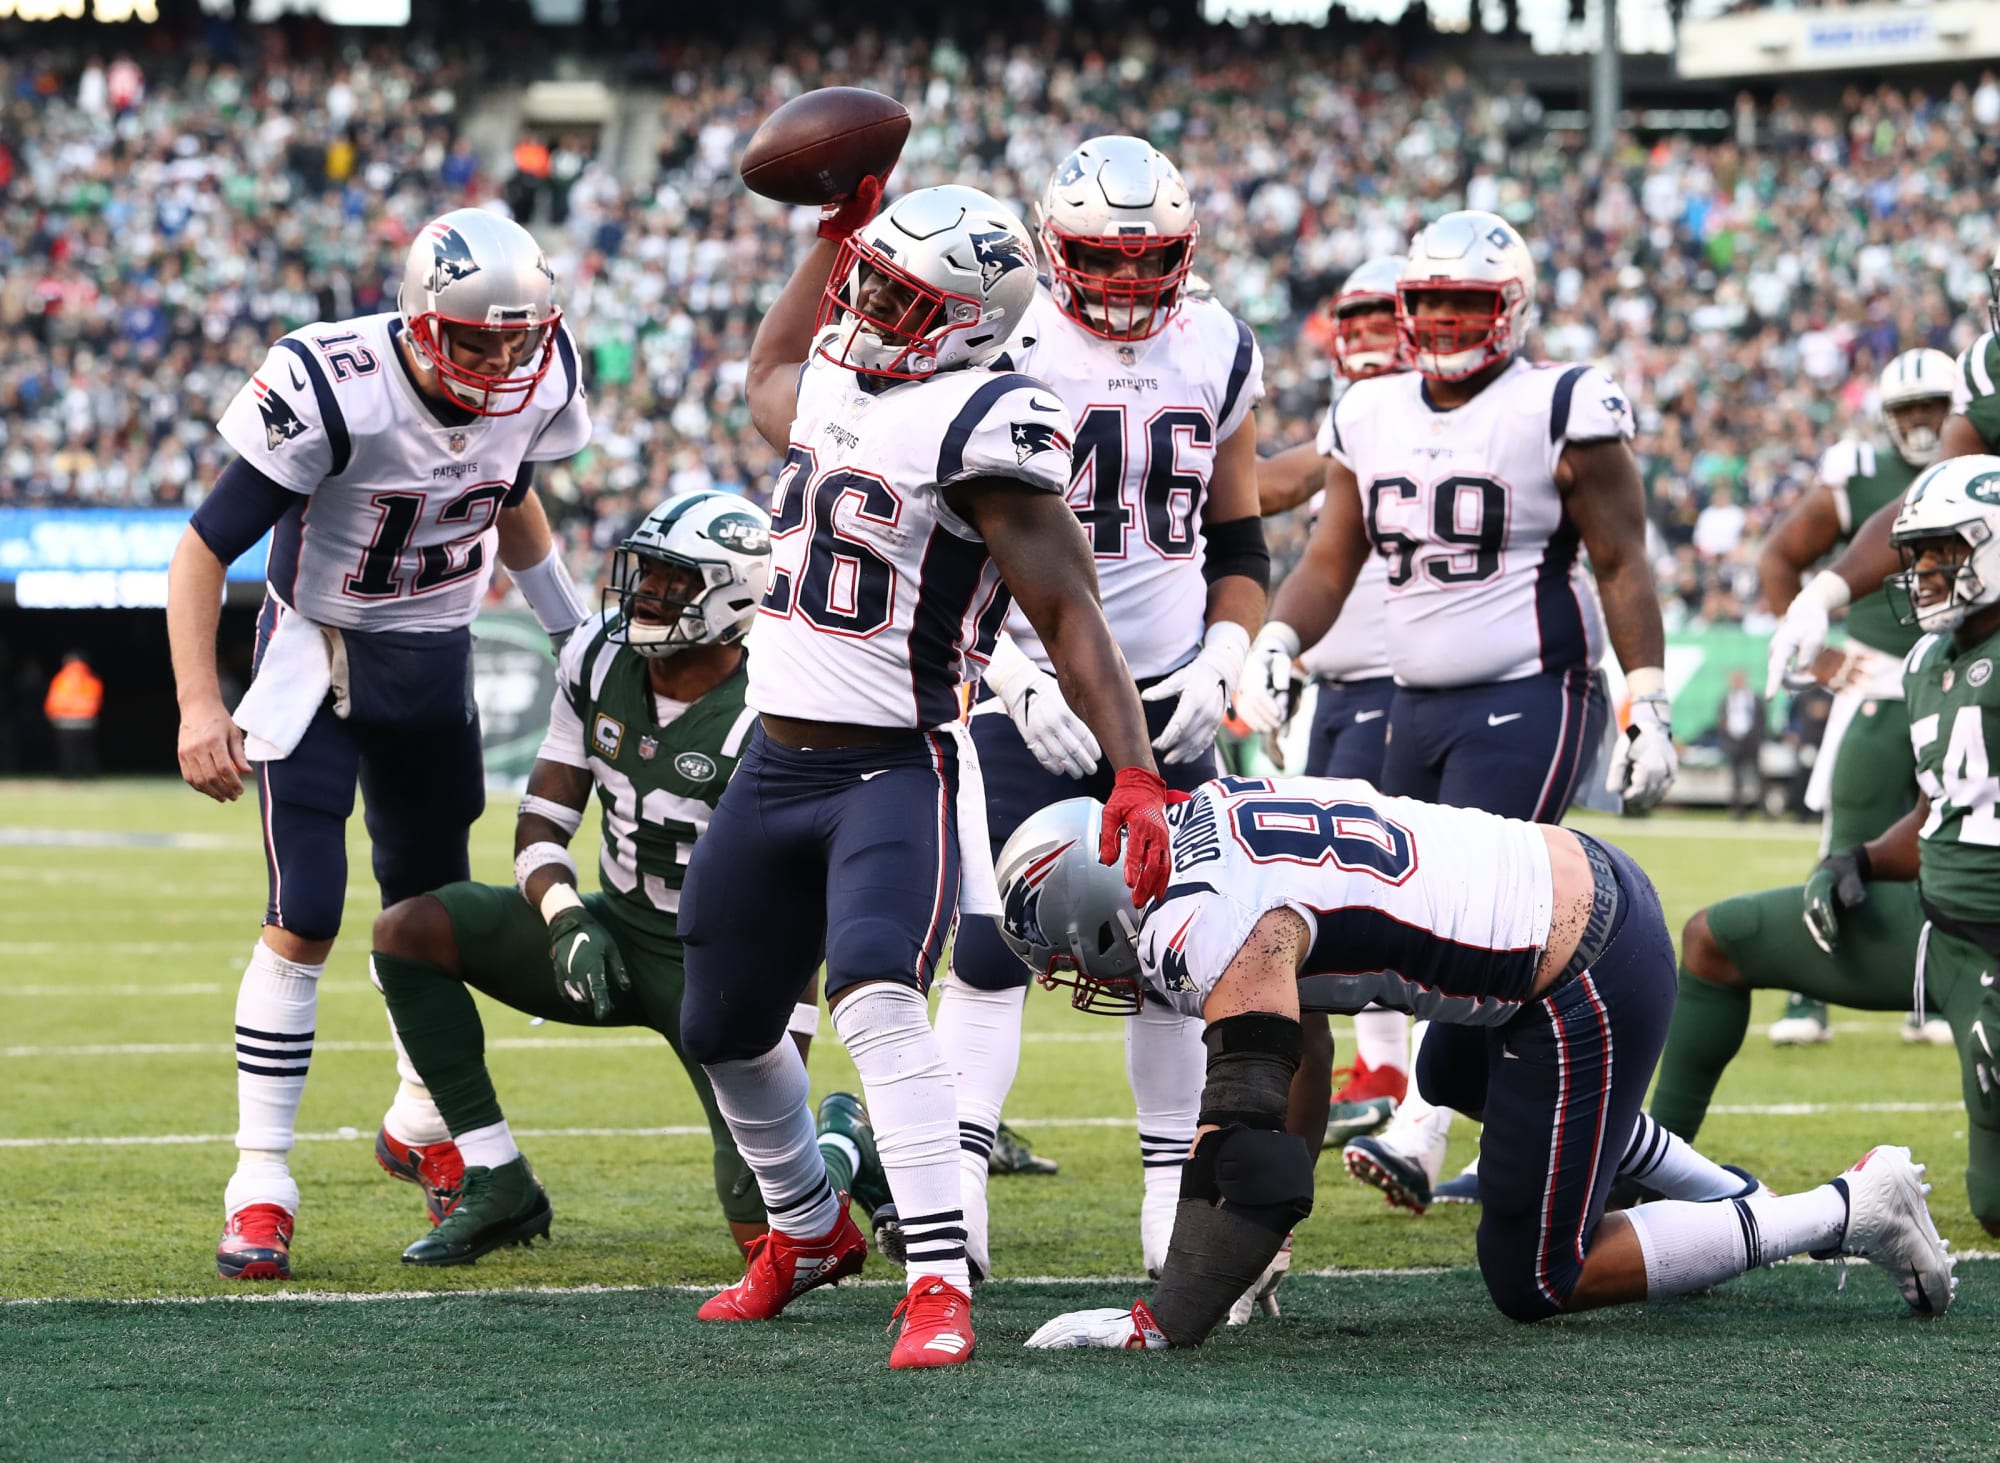 Patriots vs Jets: Final thoughts and questions before the game